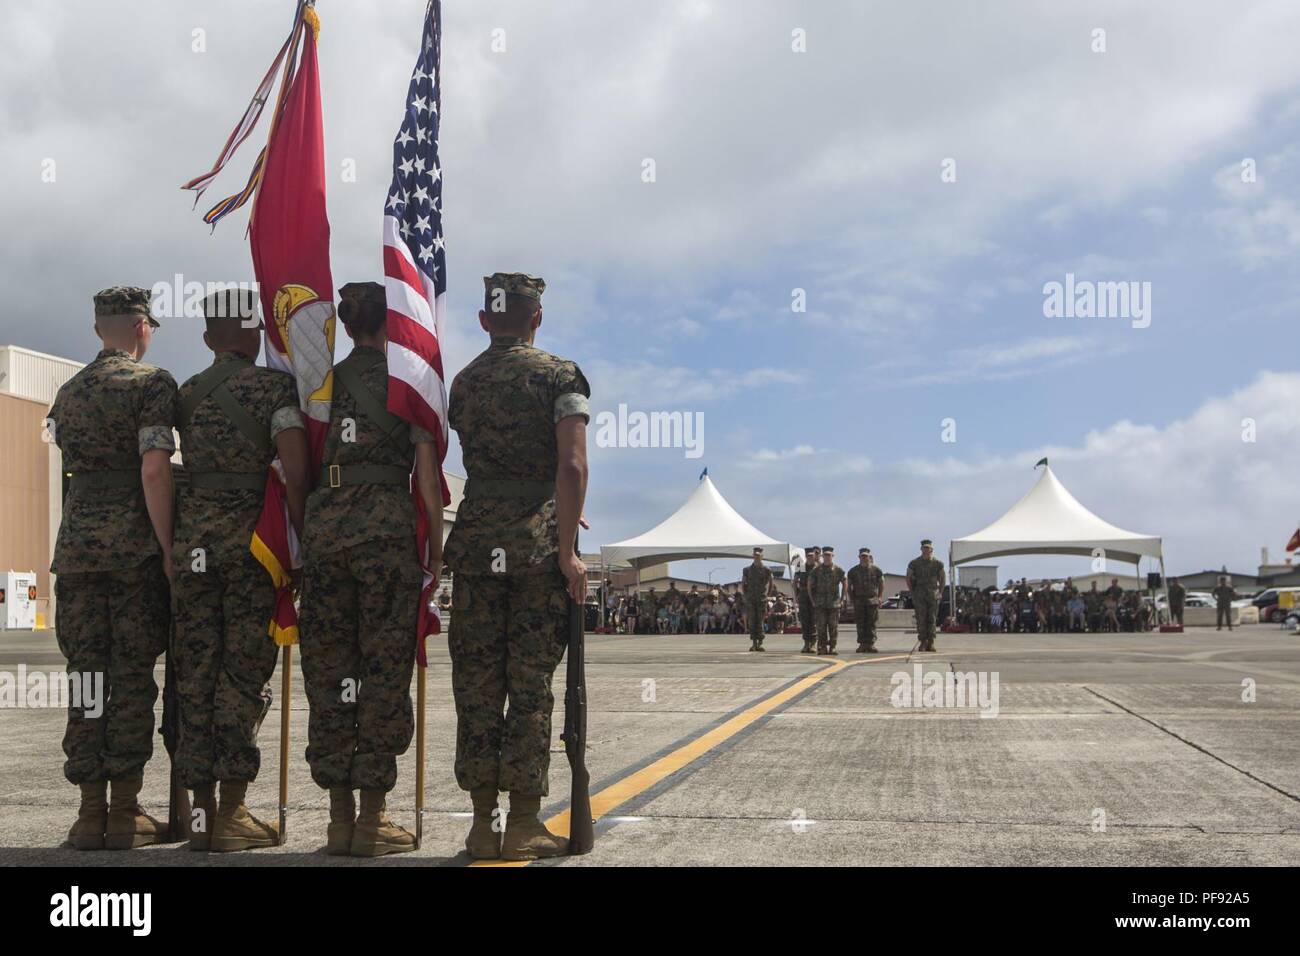 U.S. Marines with Marine Unmanned Aerial Vehicle Squadron 3 (VMU-3) salute during a change of command ceremony, Marine Corps Air Station Kaneohe Bay, Marine Corps Base Hawaii, June 7, 2018. Lt. Col. Kenneth Phelps retired and relinquished command of VMU-3 to Lt. Col. Peter Ban. Stock Photo